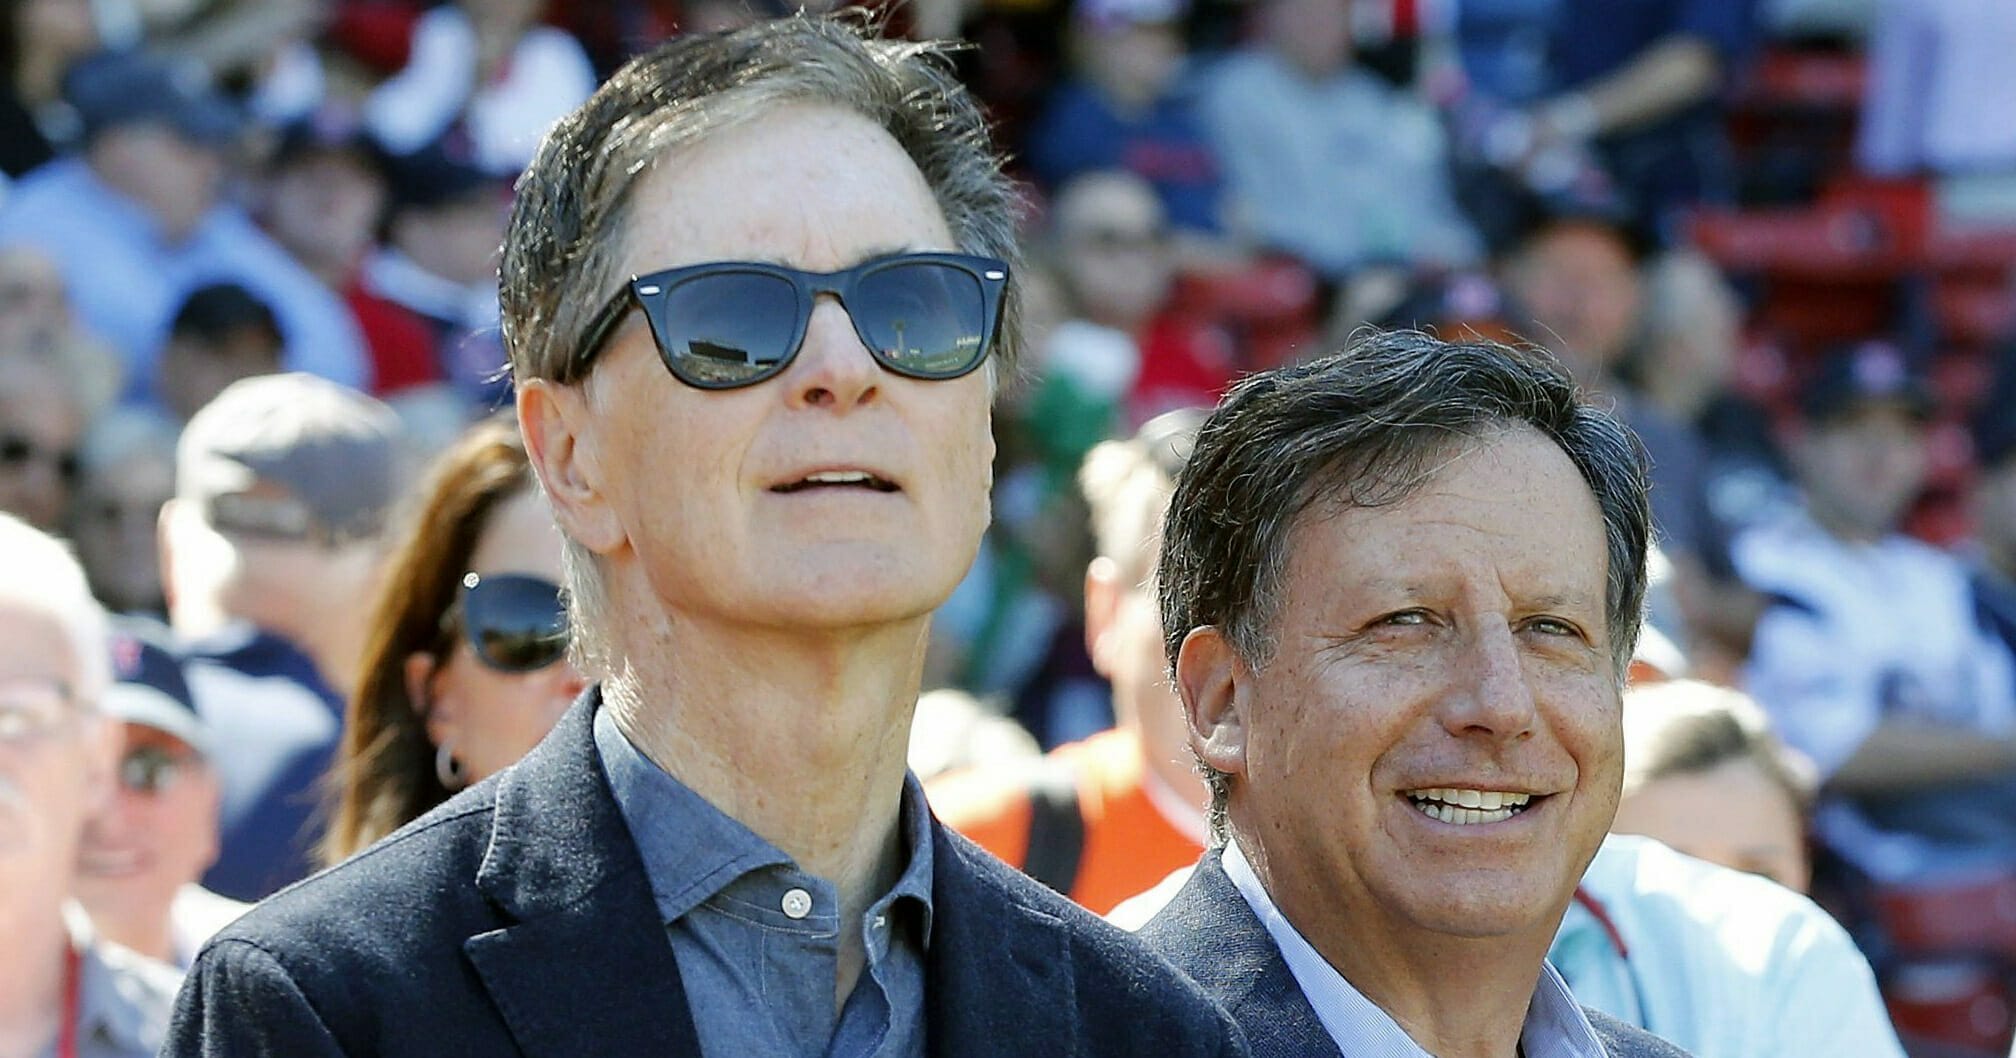 In this Sept. 27, 2015, file photo, Boston Red Sox owners John Henry, left, and Tom Werner look on before a baseball game between the Red Sox and the Baltimore Orioles in Boston.